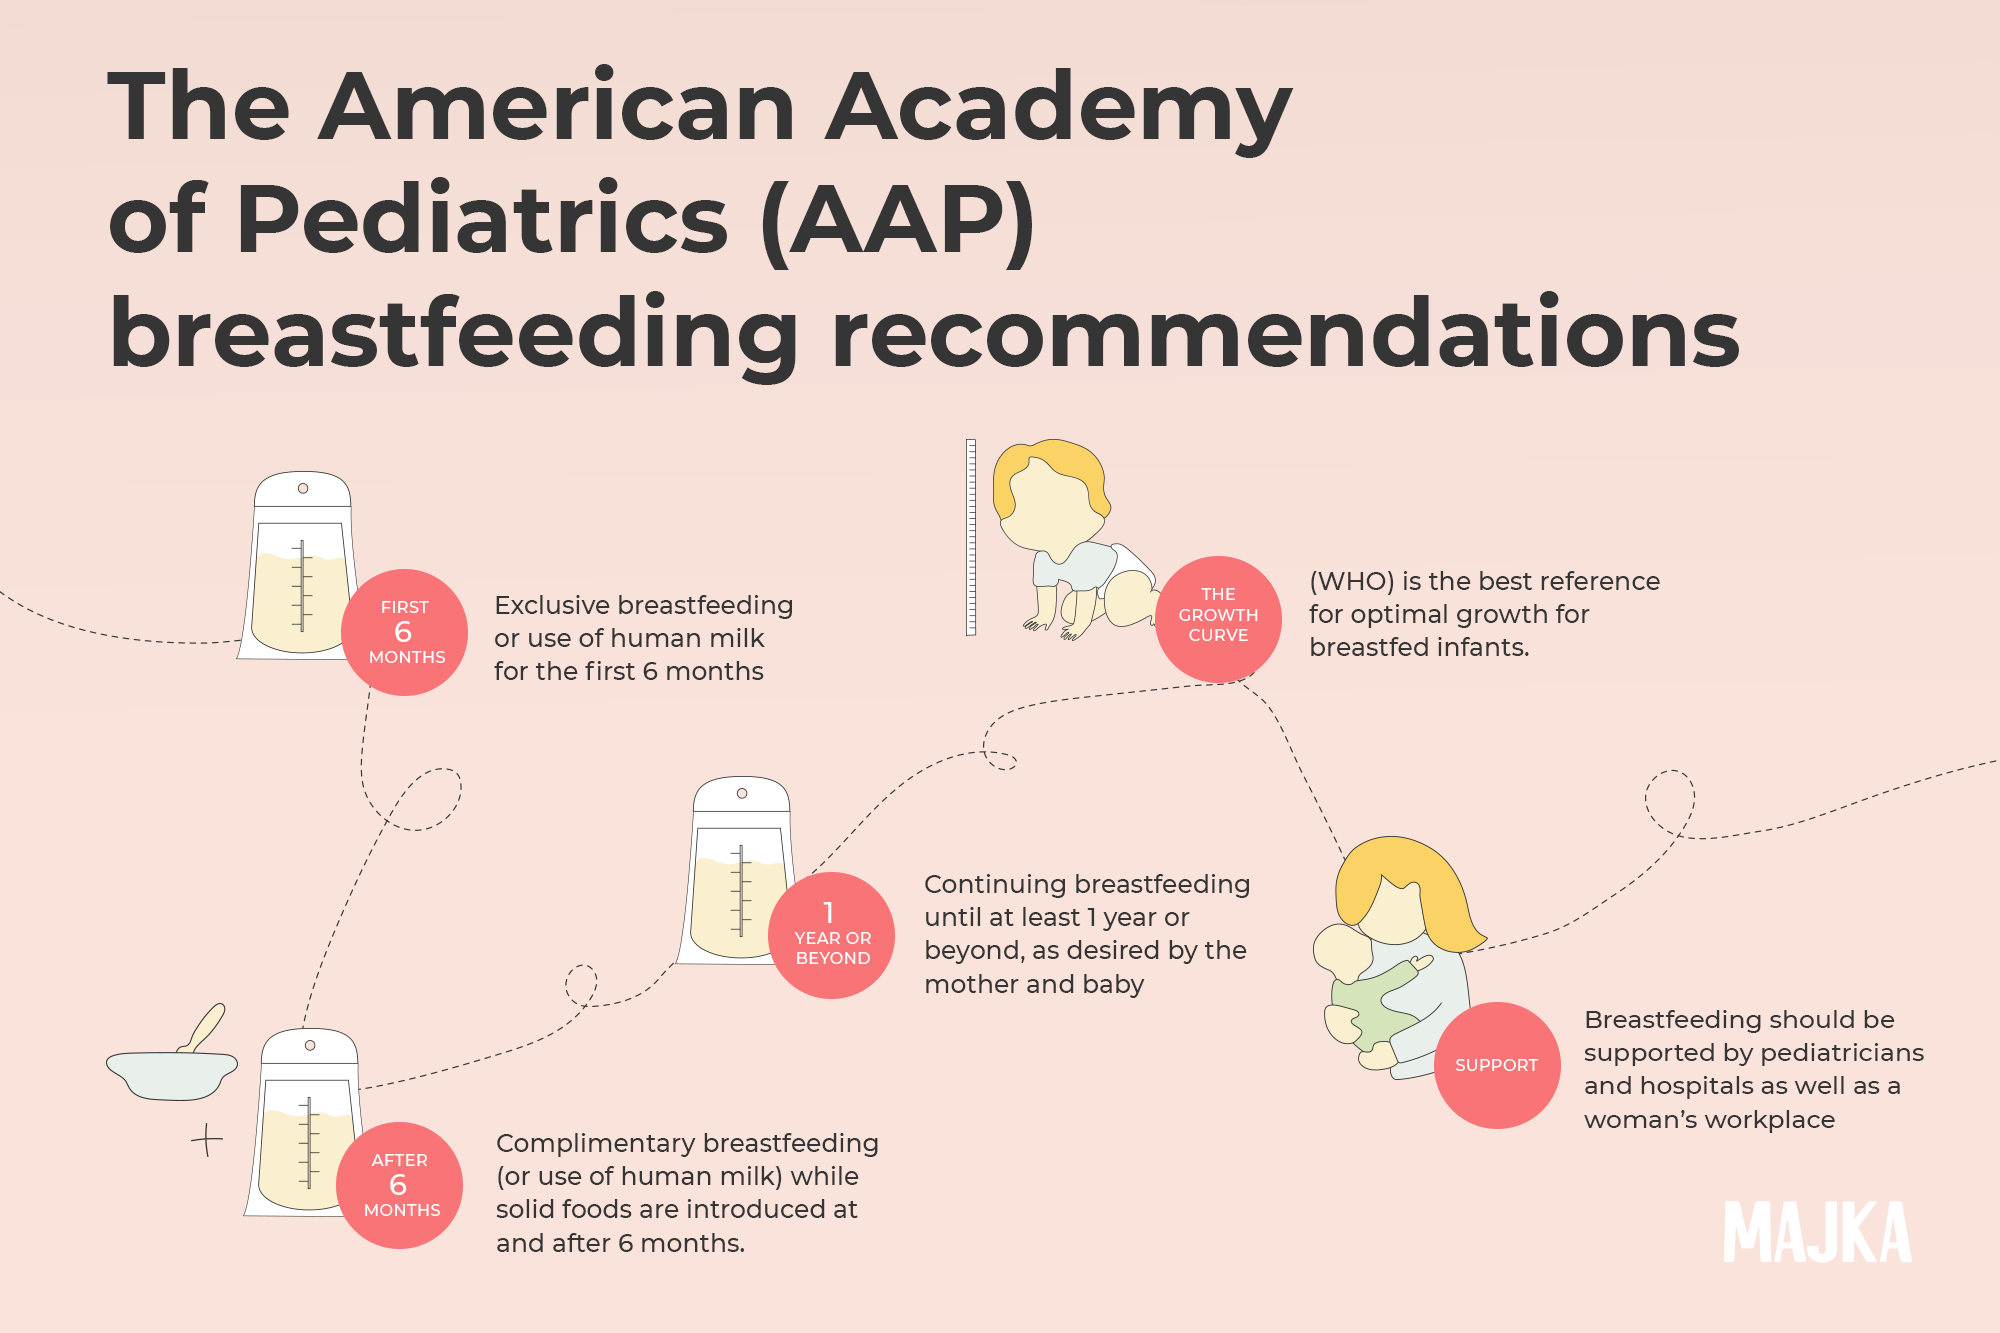 What are the Recommendations for Breastfeeding?